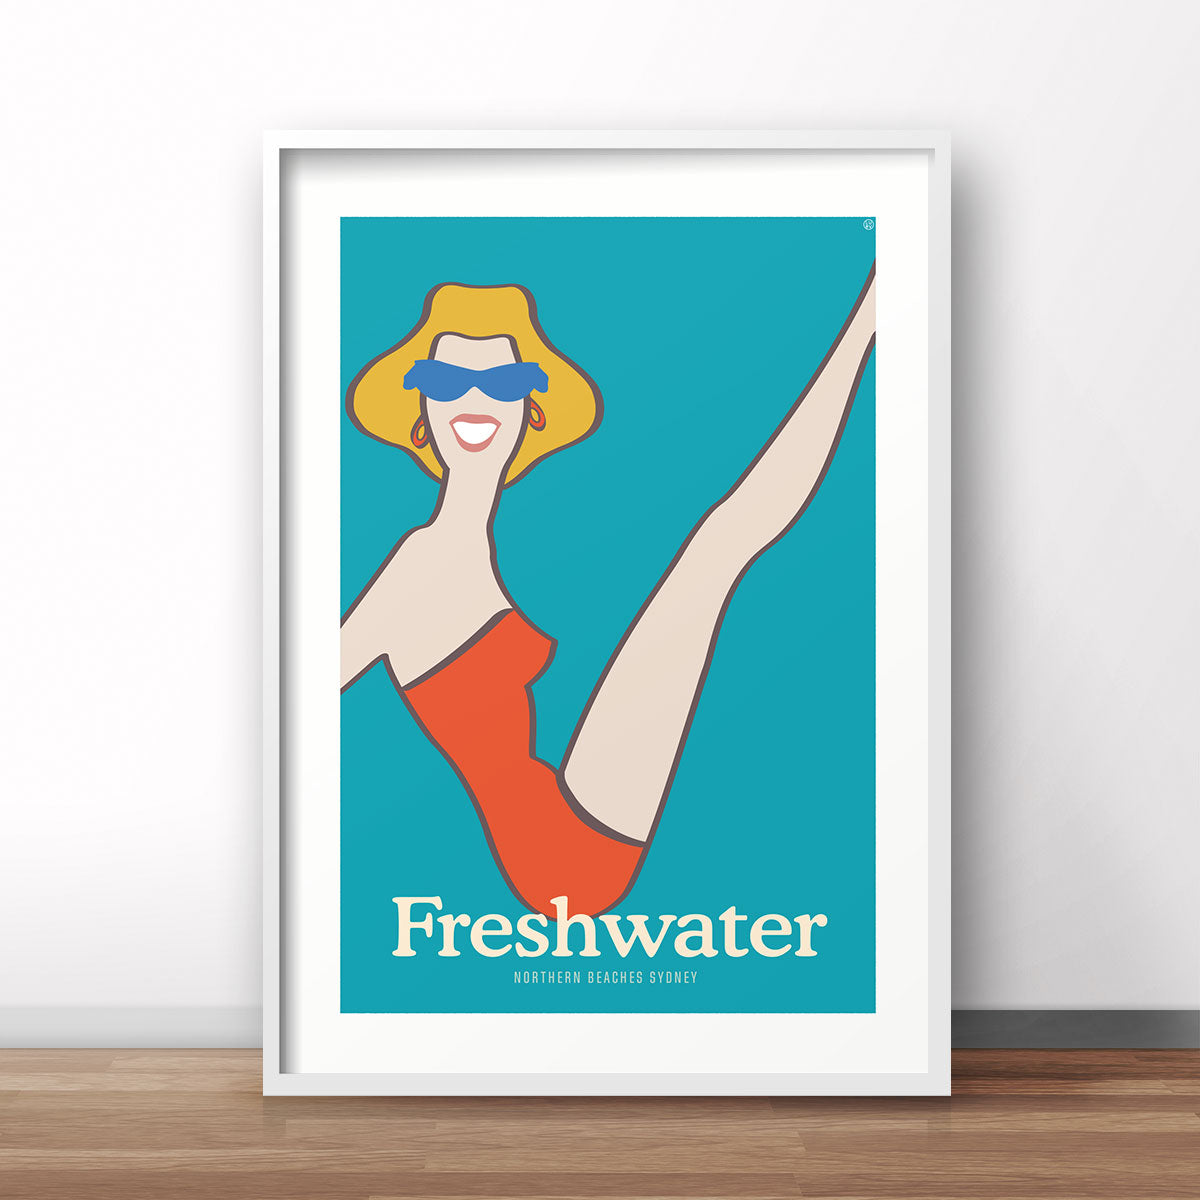 Freshwater Sydney vintage retro poster from Places We Luv print